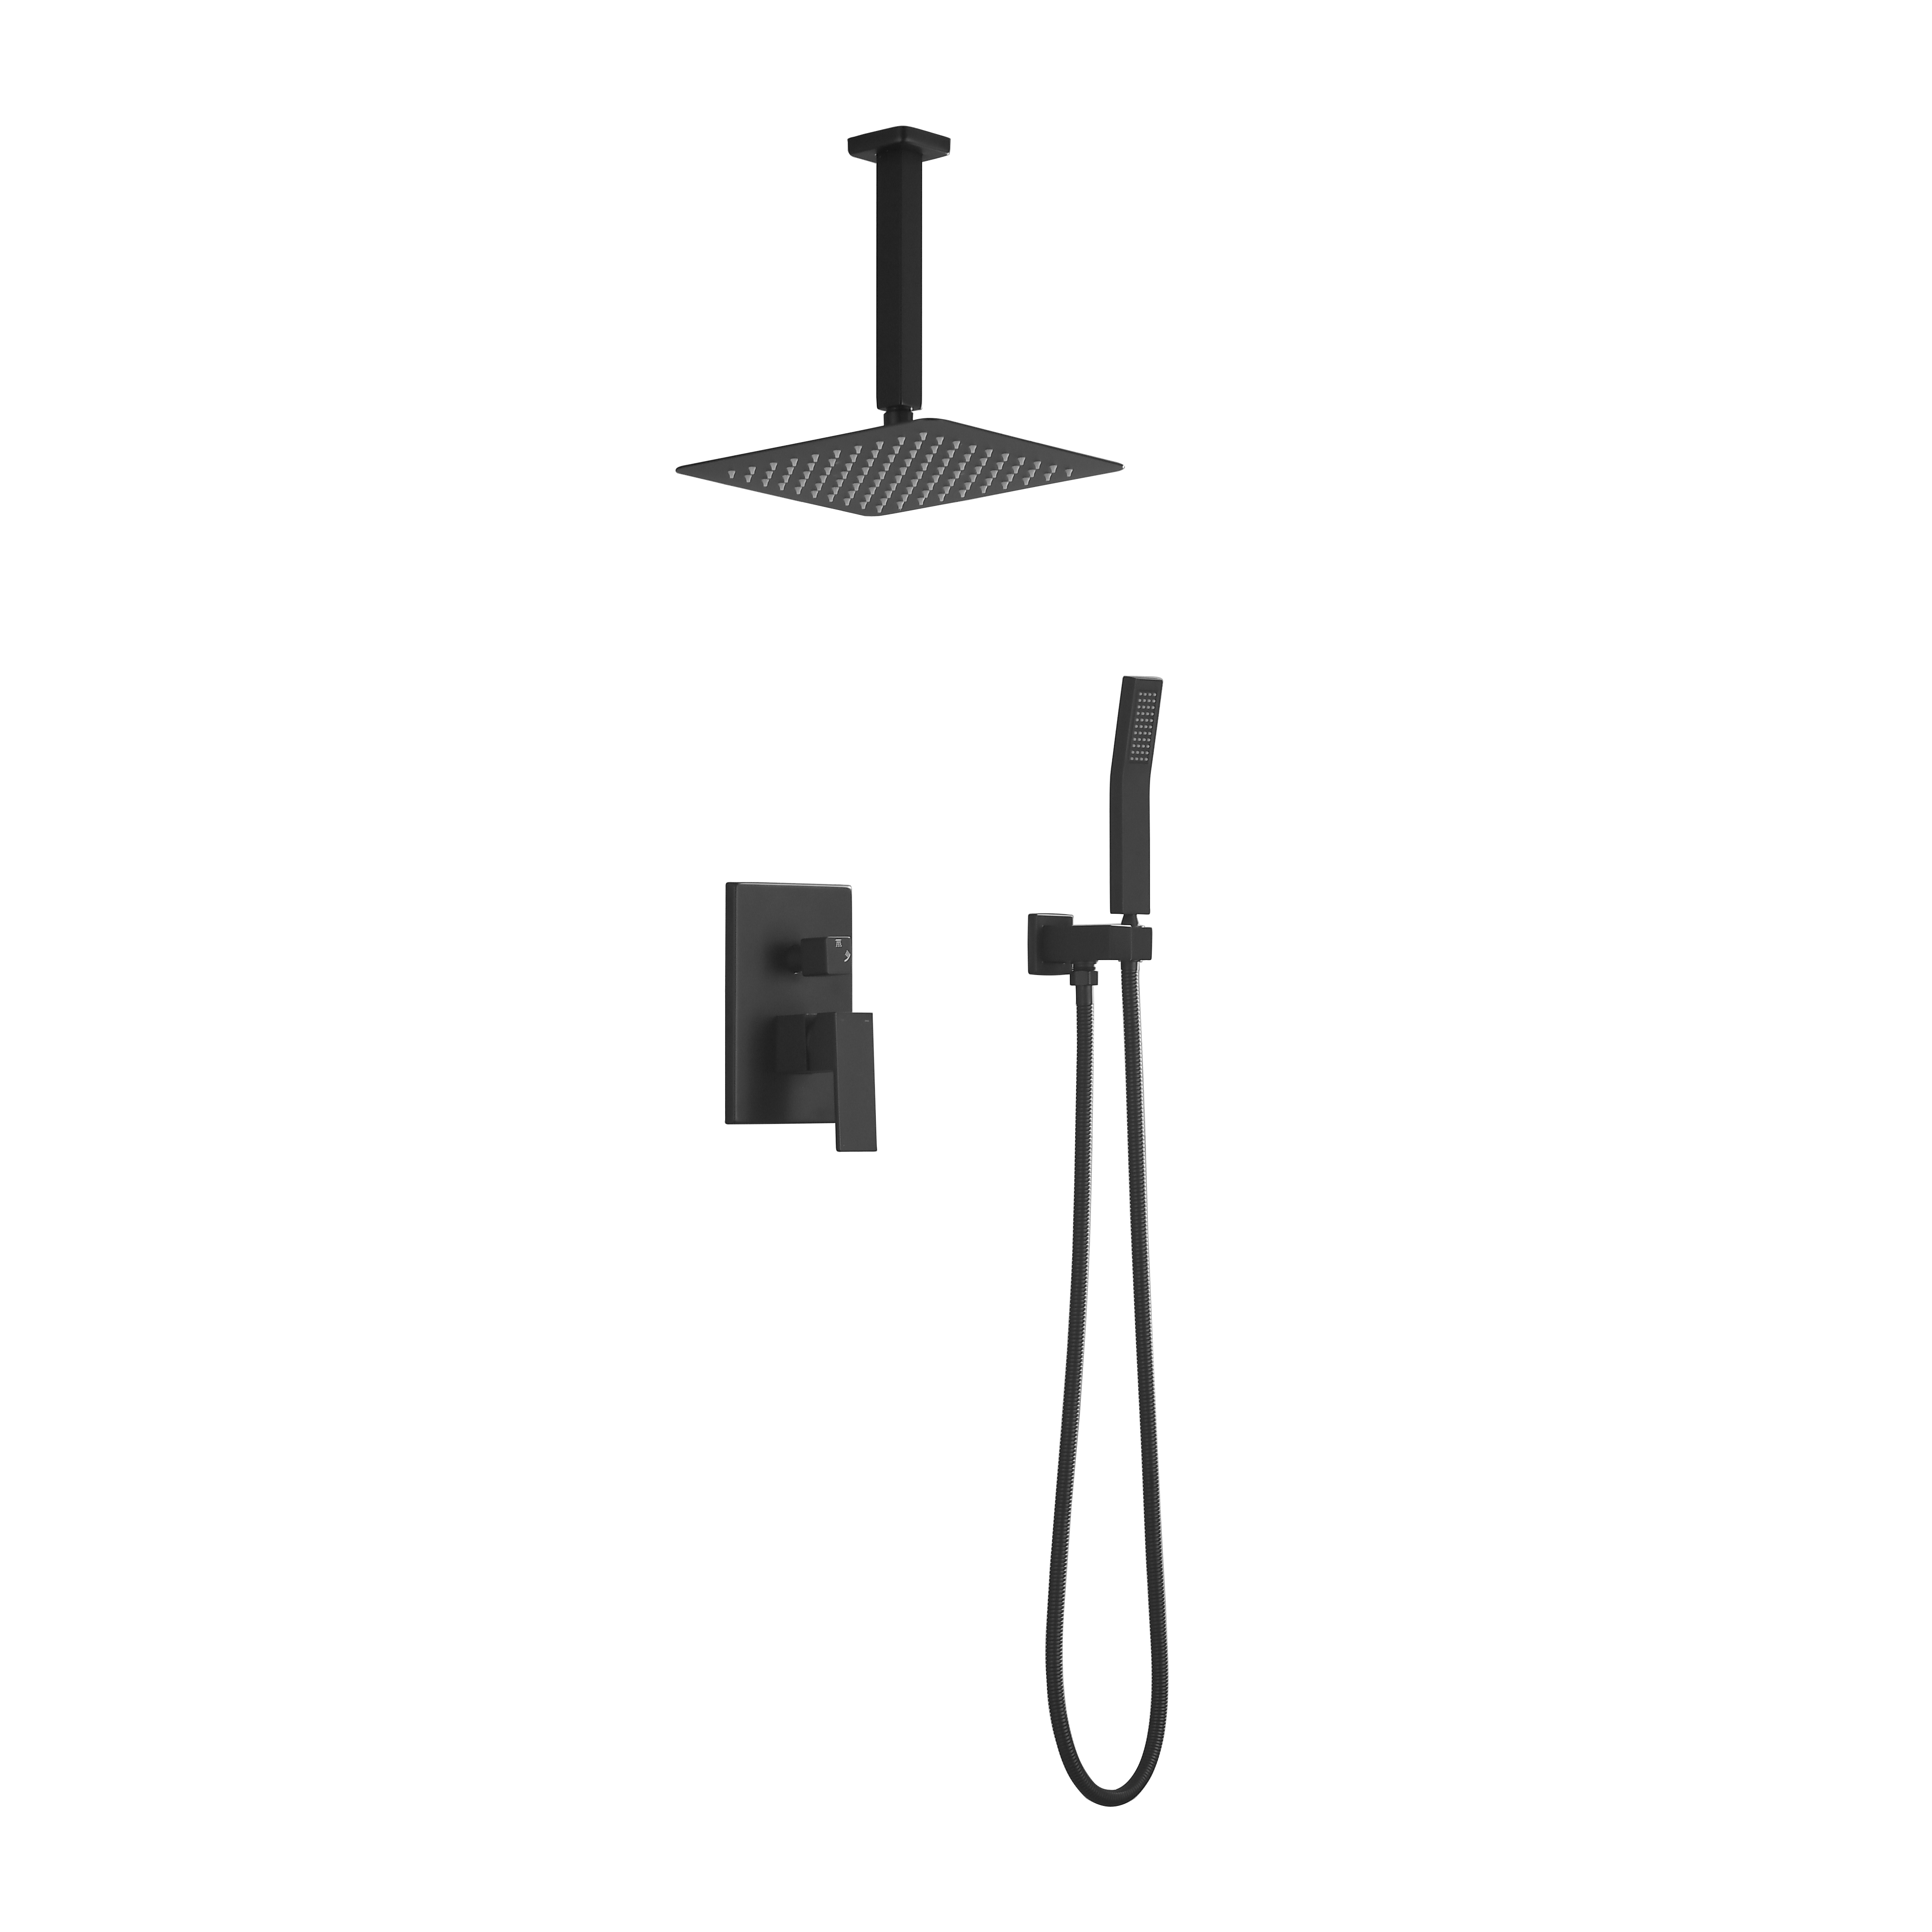 10 Inches Matte Black Shower Set System Bathroom Luxury Rain Mixer Shower Combo Set Ceiling Mounted Rainfall Shower Head Faucet (Contain Shower Faucet Rough-In Valve Body and Trim)-CASAINC